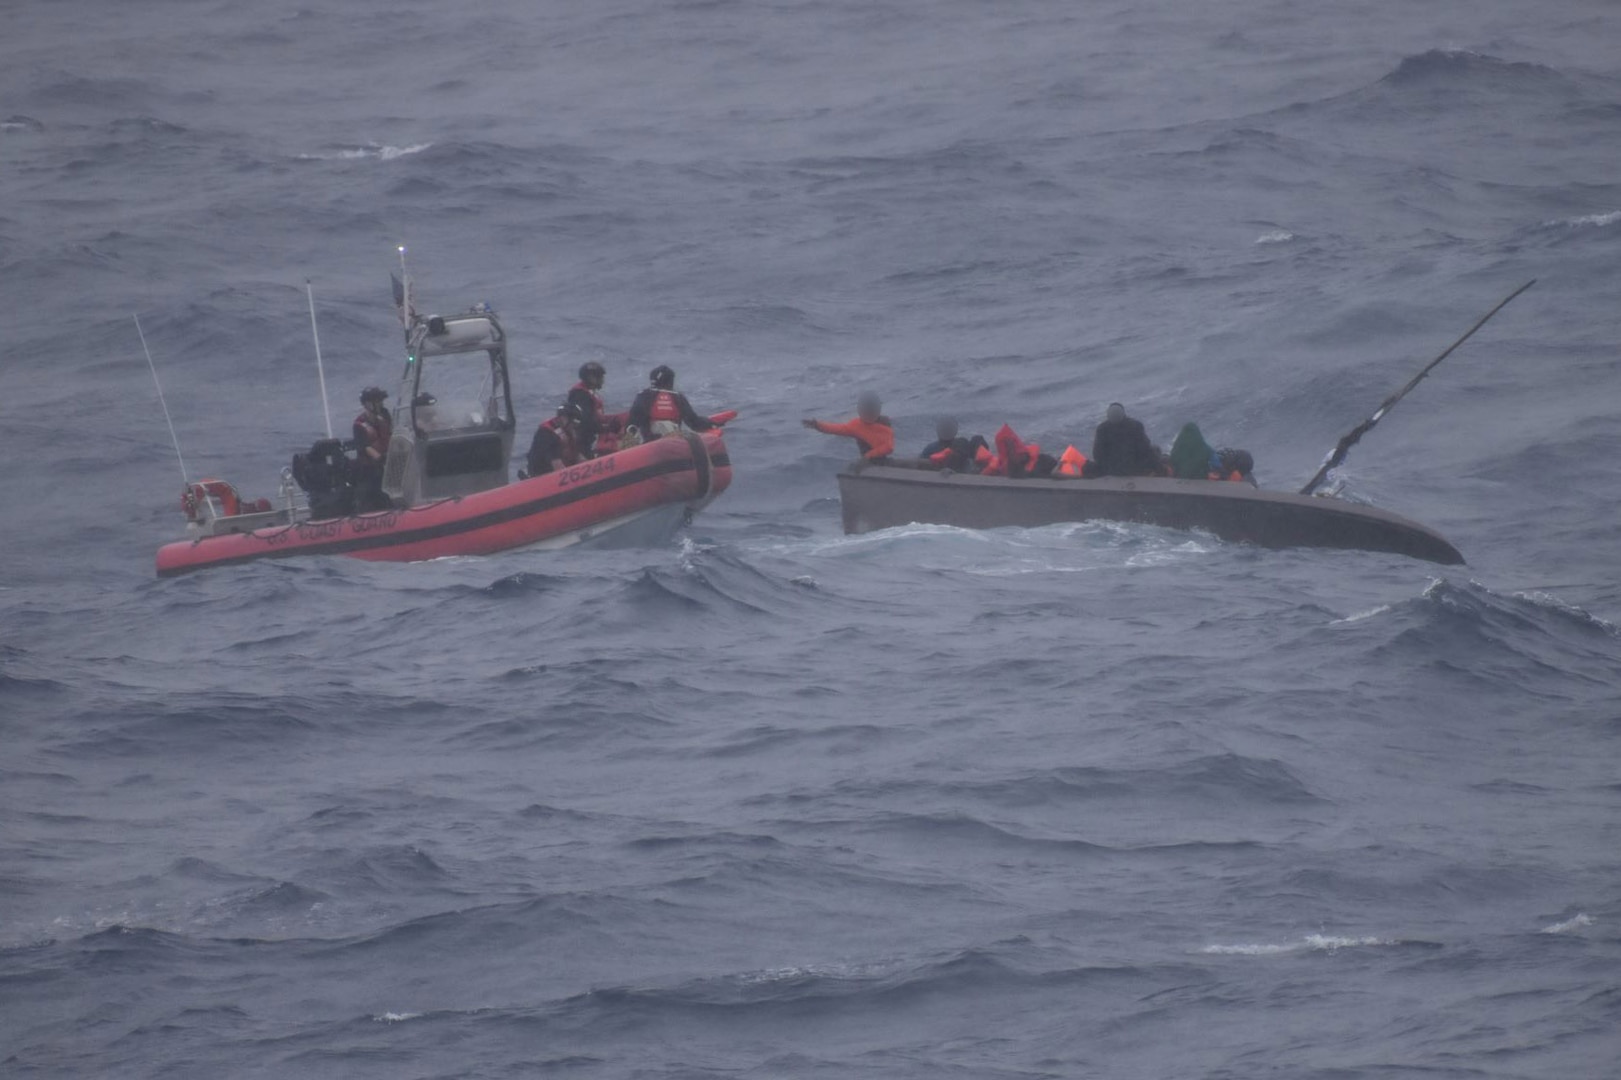 U.S. Coast Guard Cutter Dependable's crew rescues 33 people from a vessel taking on water near Cap-Haitien, Haiti, Jan. 22, 2024. The people were transferred to Haitian authorities on Jan. 23, 2024. (U.S. Coast Guard photo)